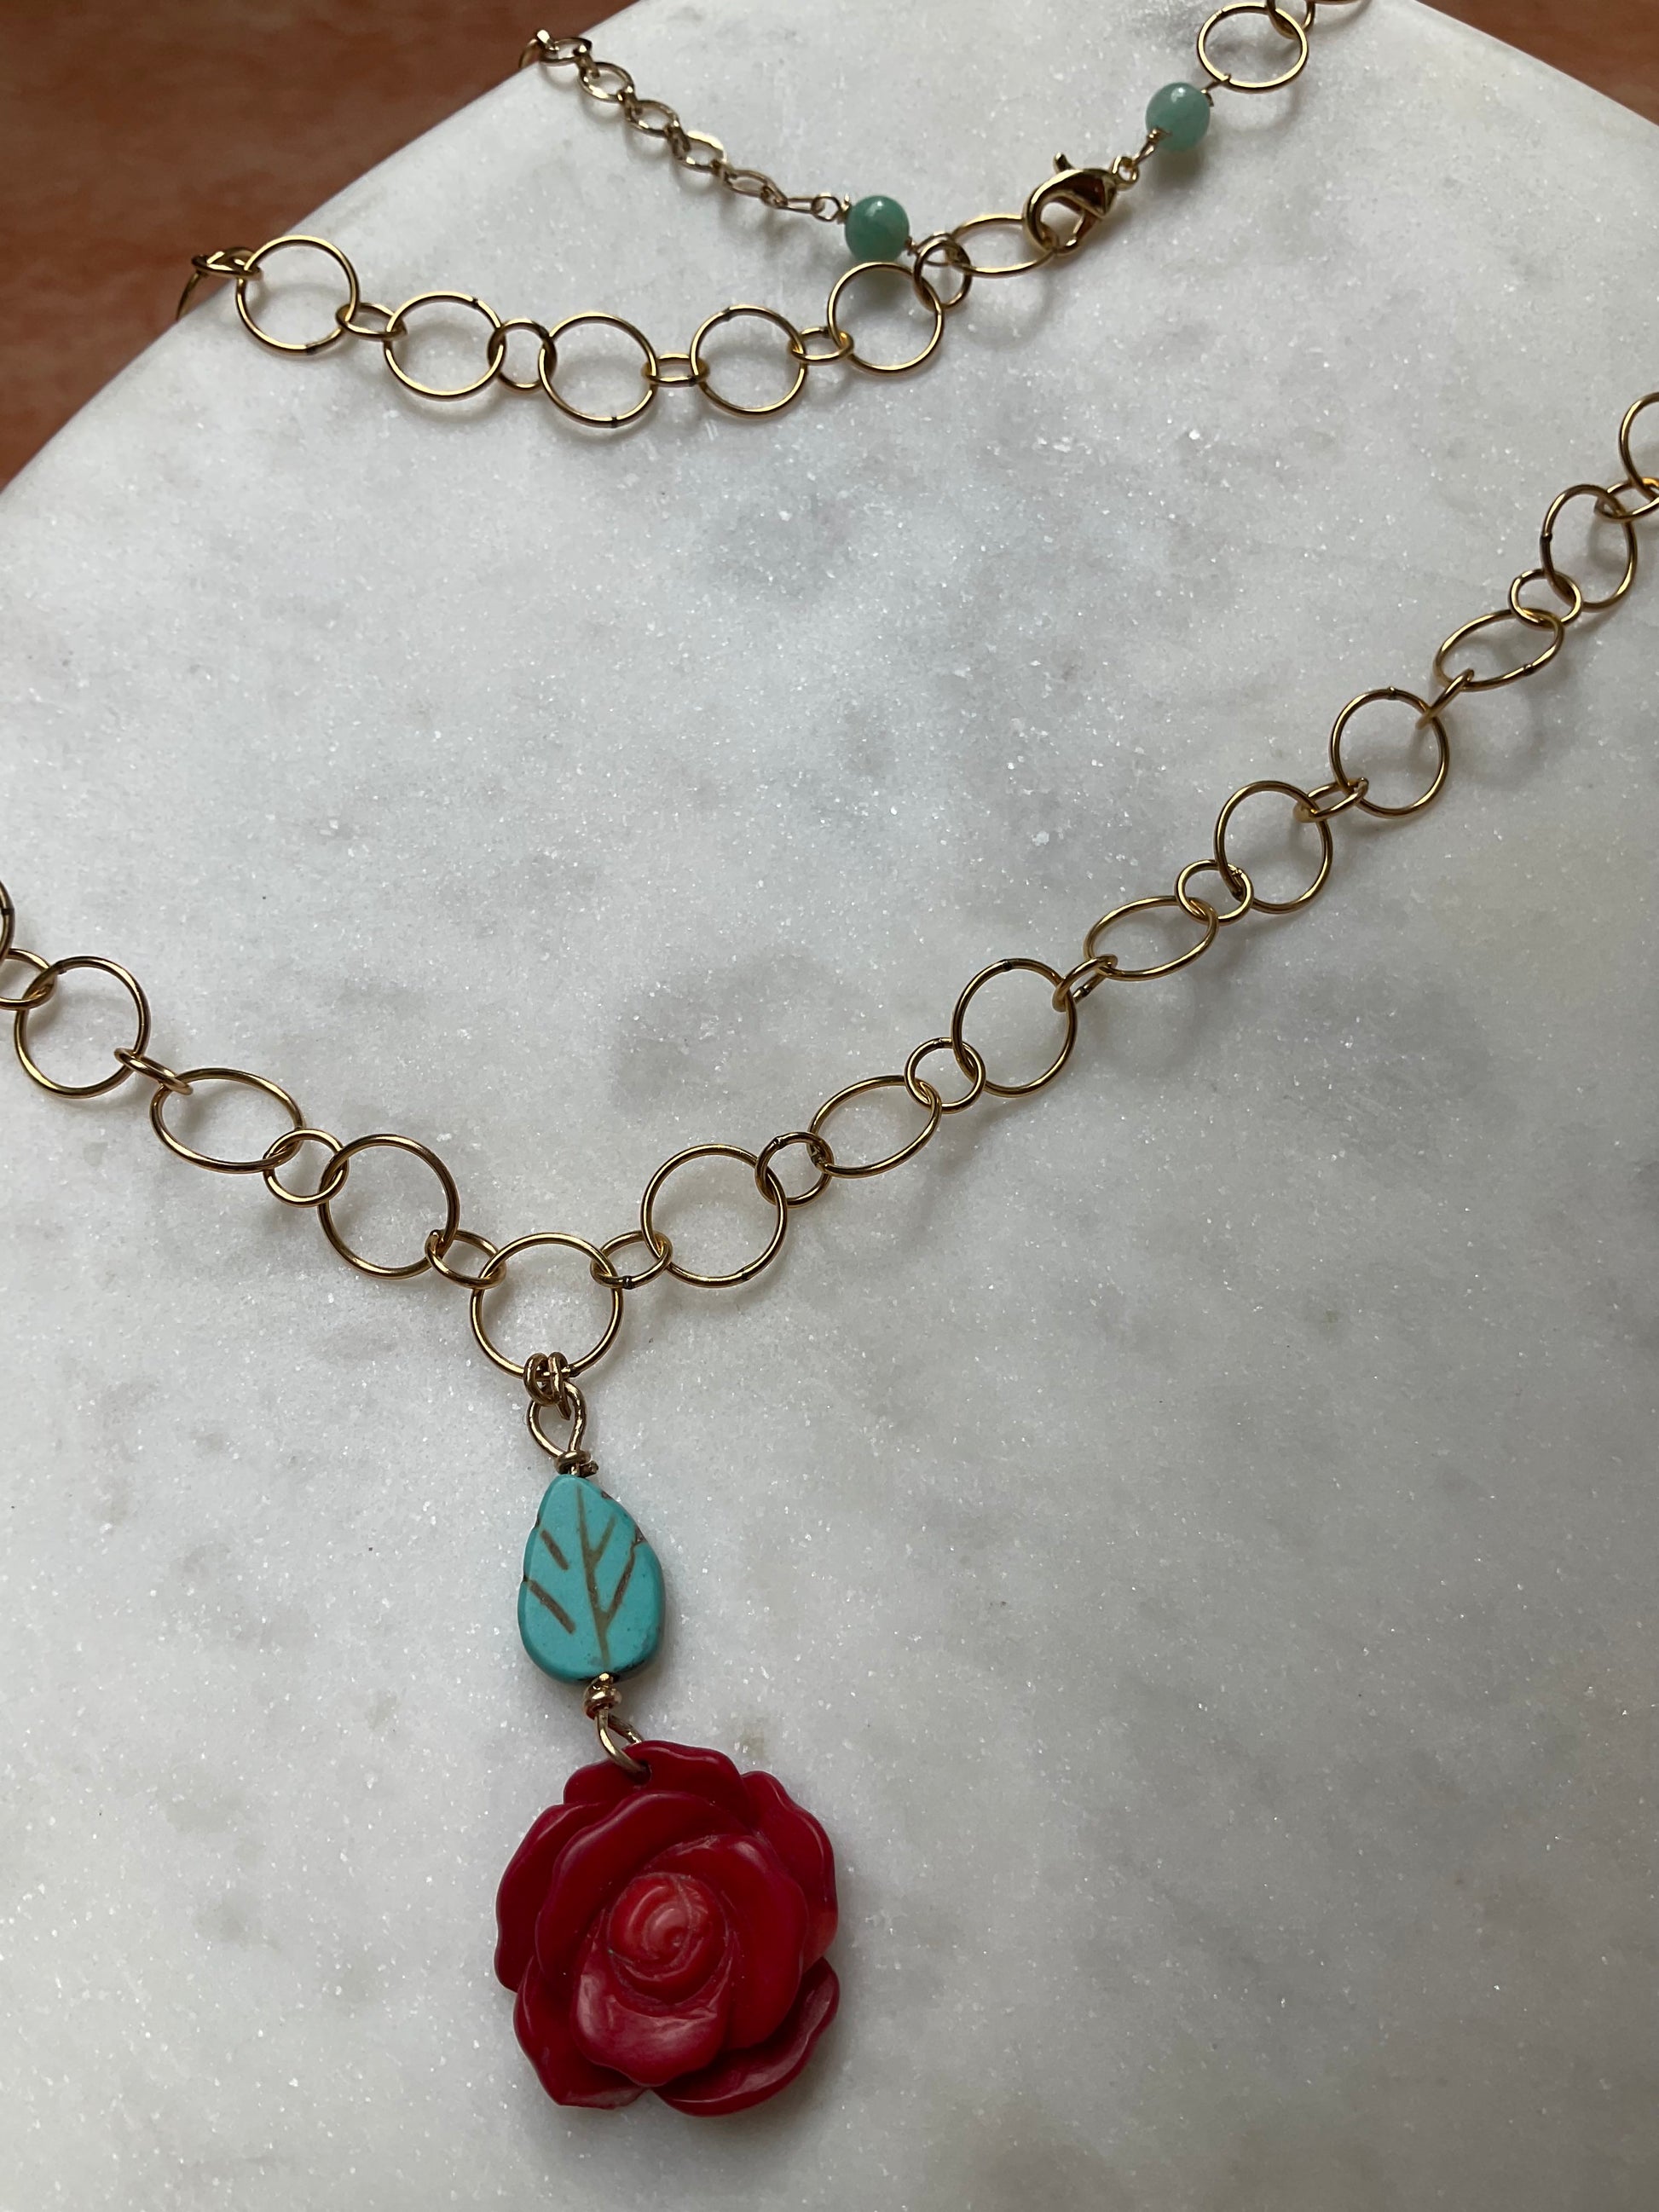 gold filled chain necklace with rose coral pendant and turquoise leaf